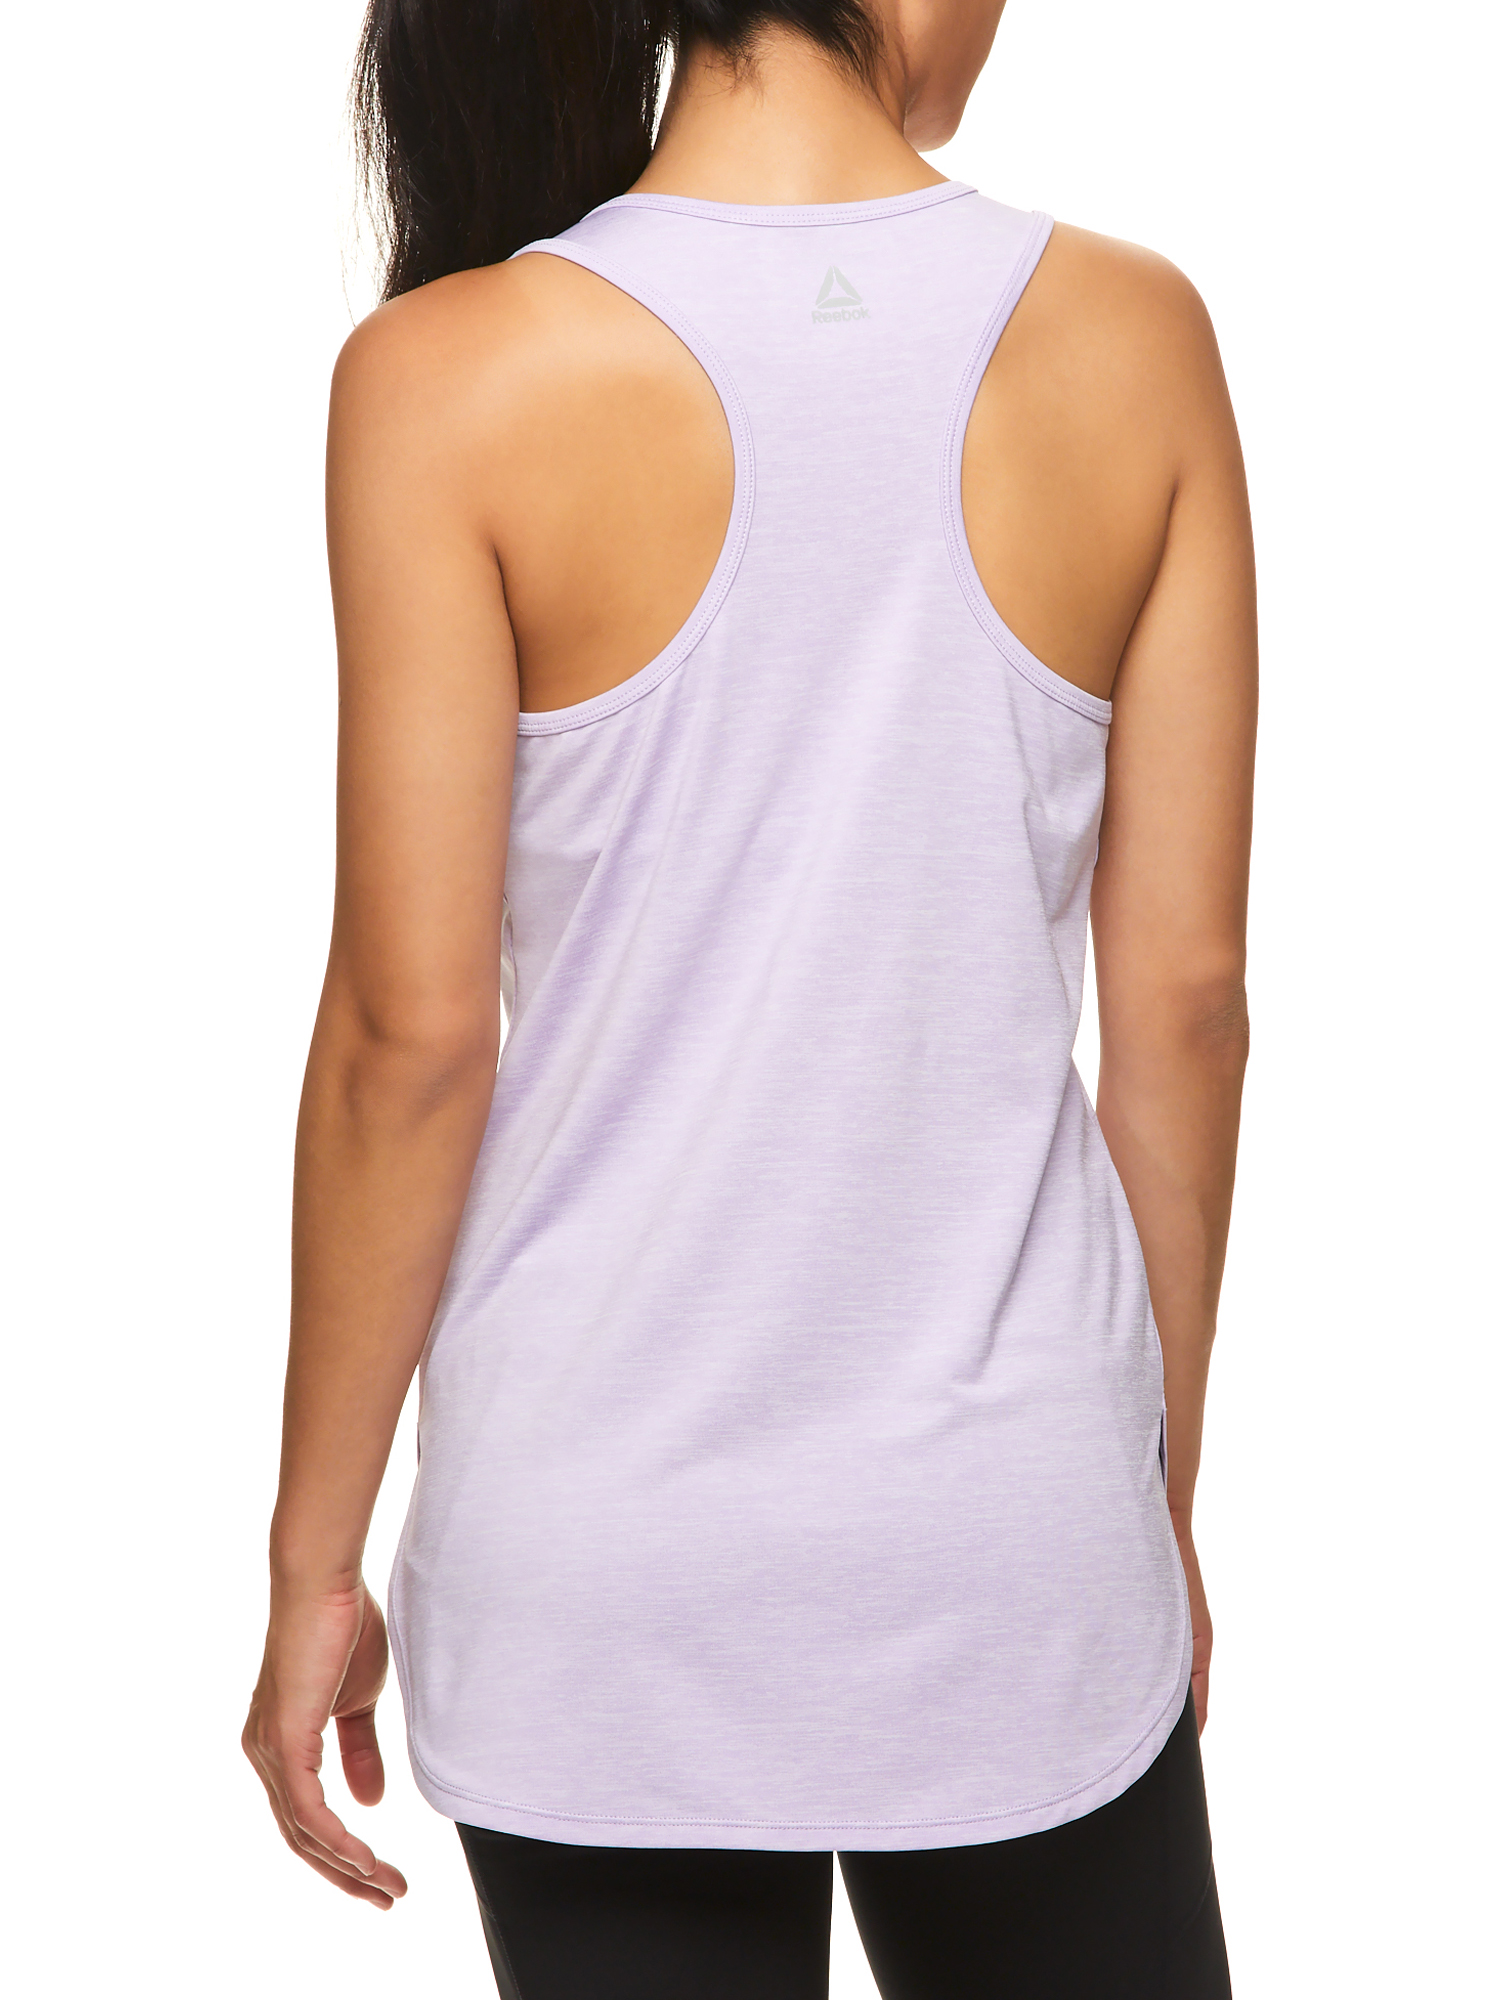 Reebok Women's Mythic Graphic Tank Top - image 4 of 4